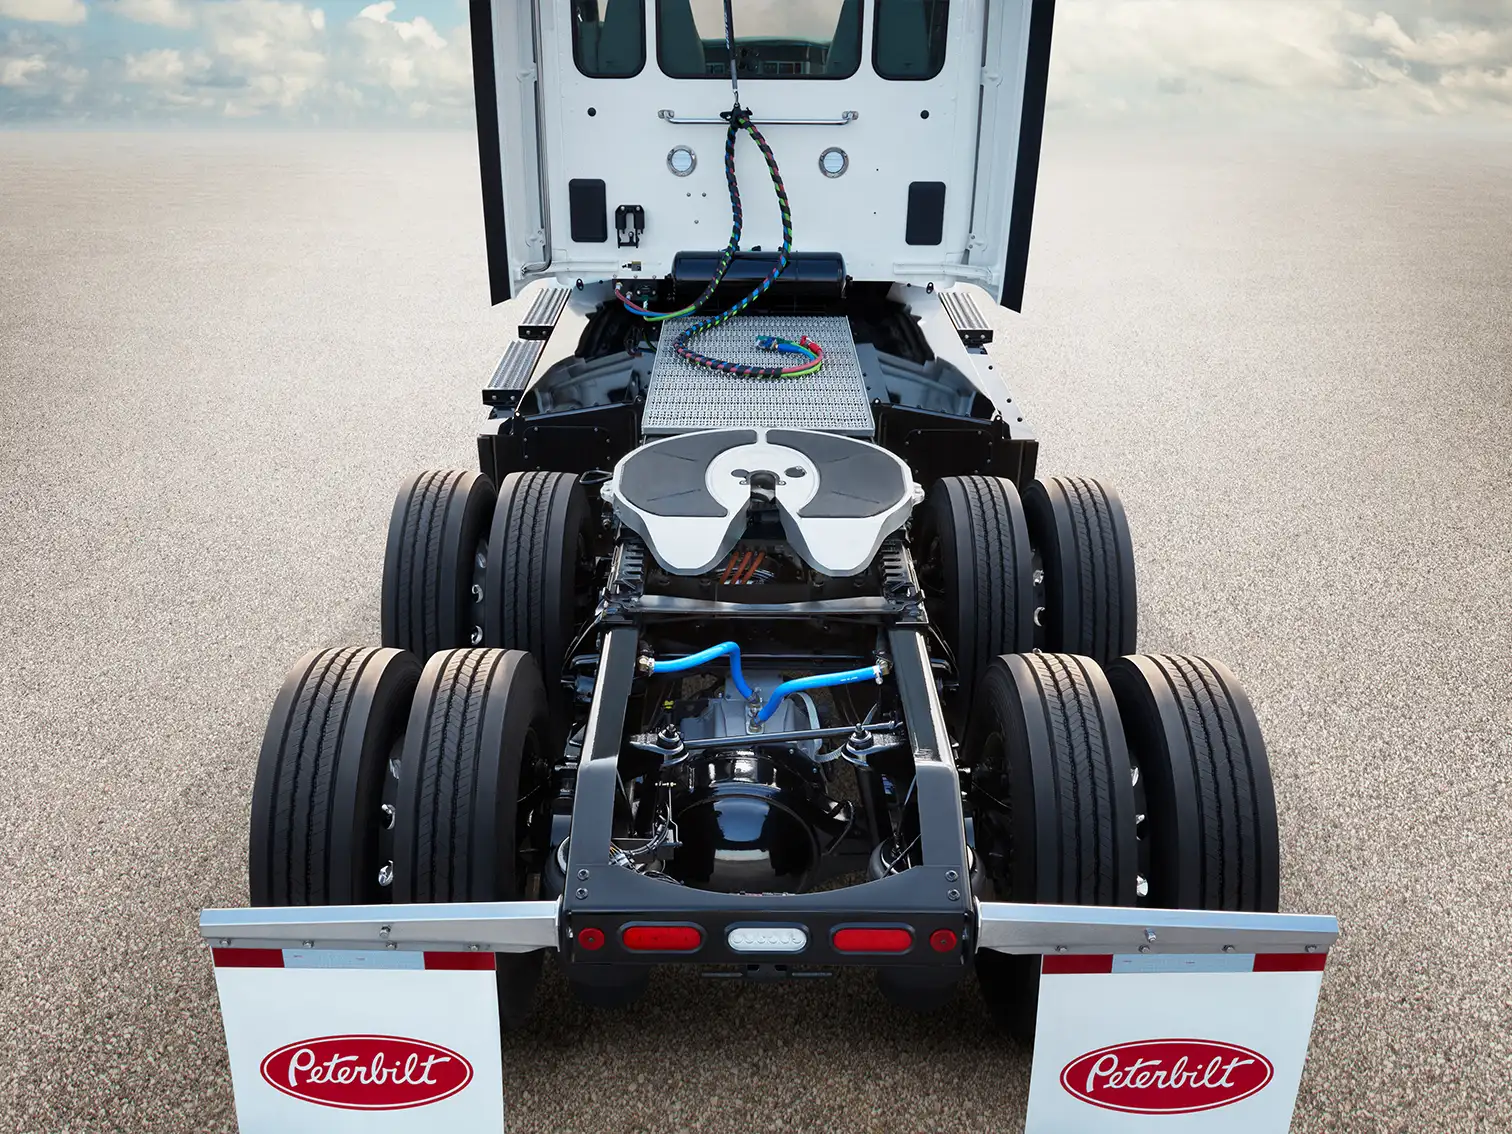 Showcase of the alternative fuel system on a Peterbilt truck